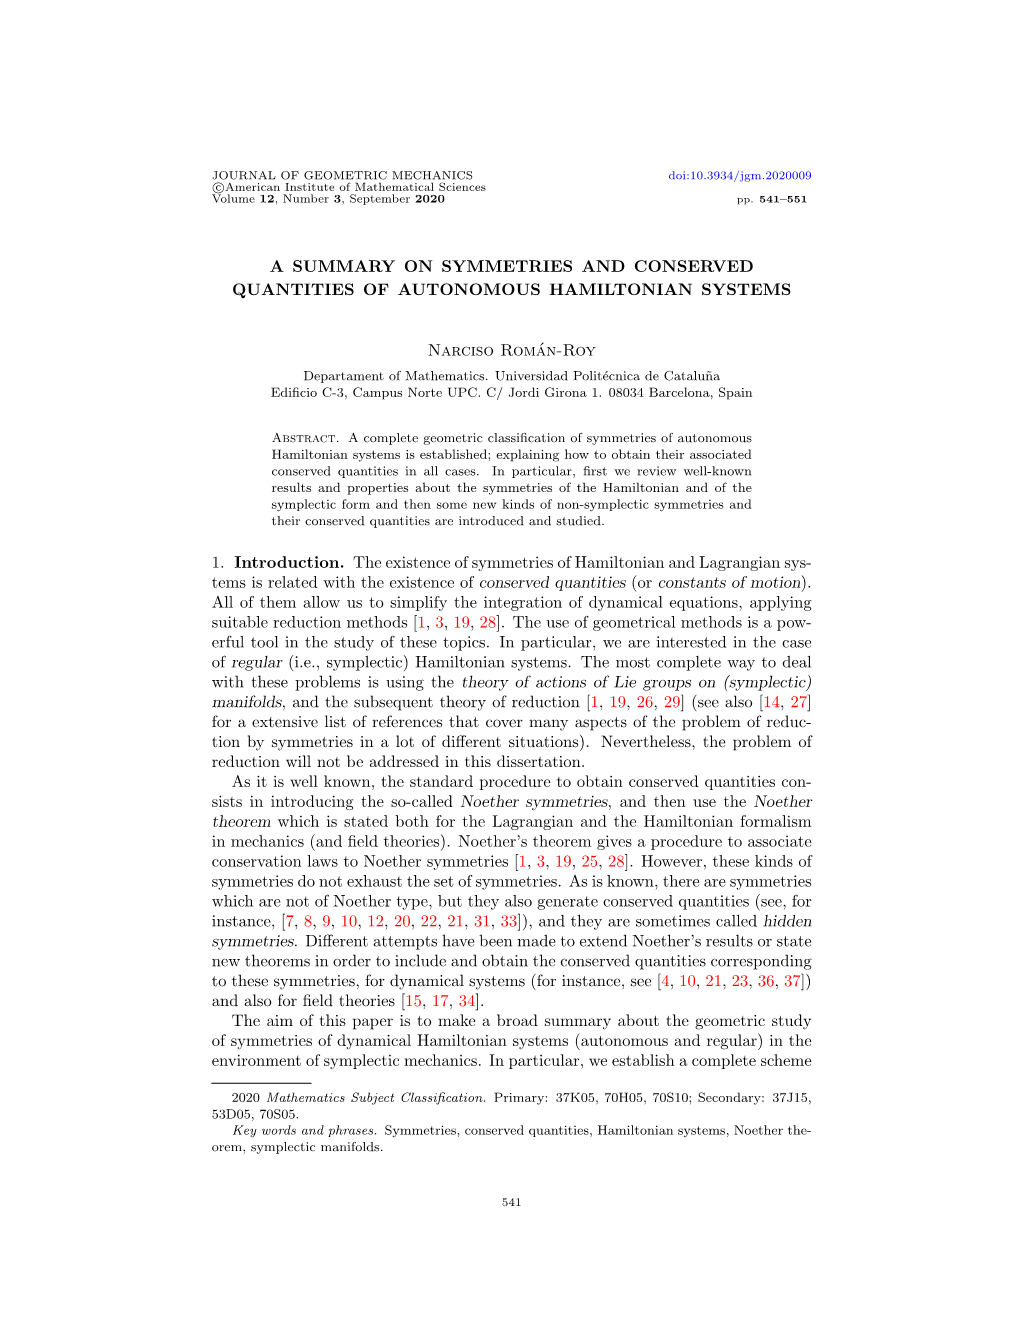 A Summary on Symmetries and Conserved Quantities of Autonomous Hamiltonian Systems